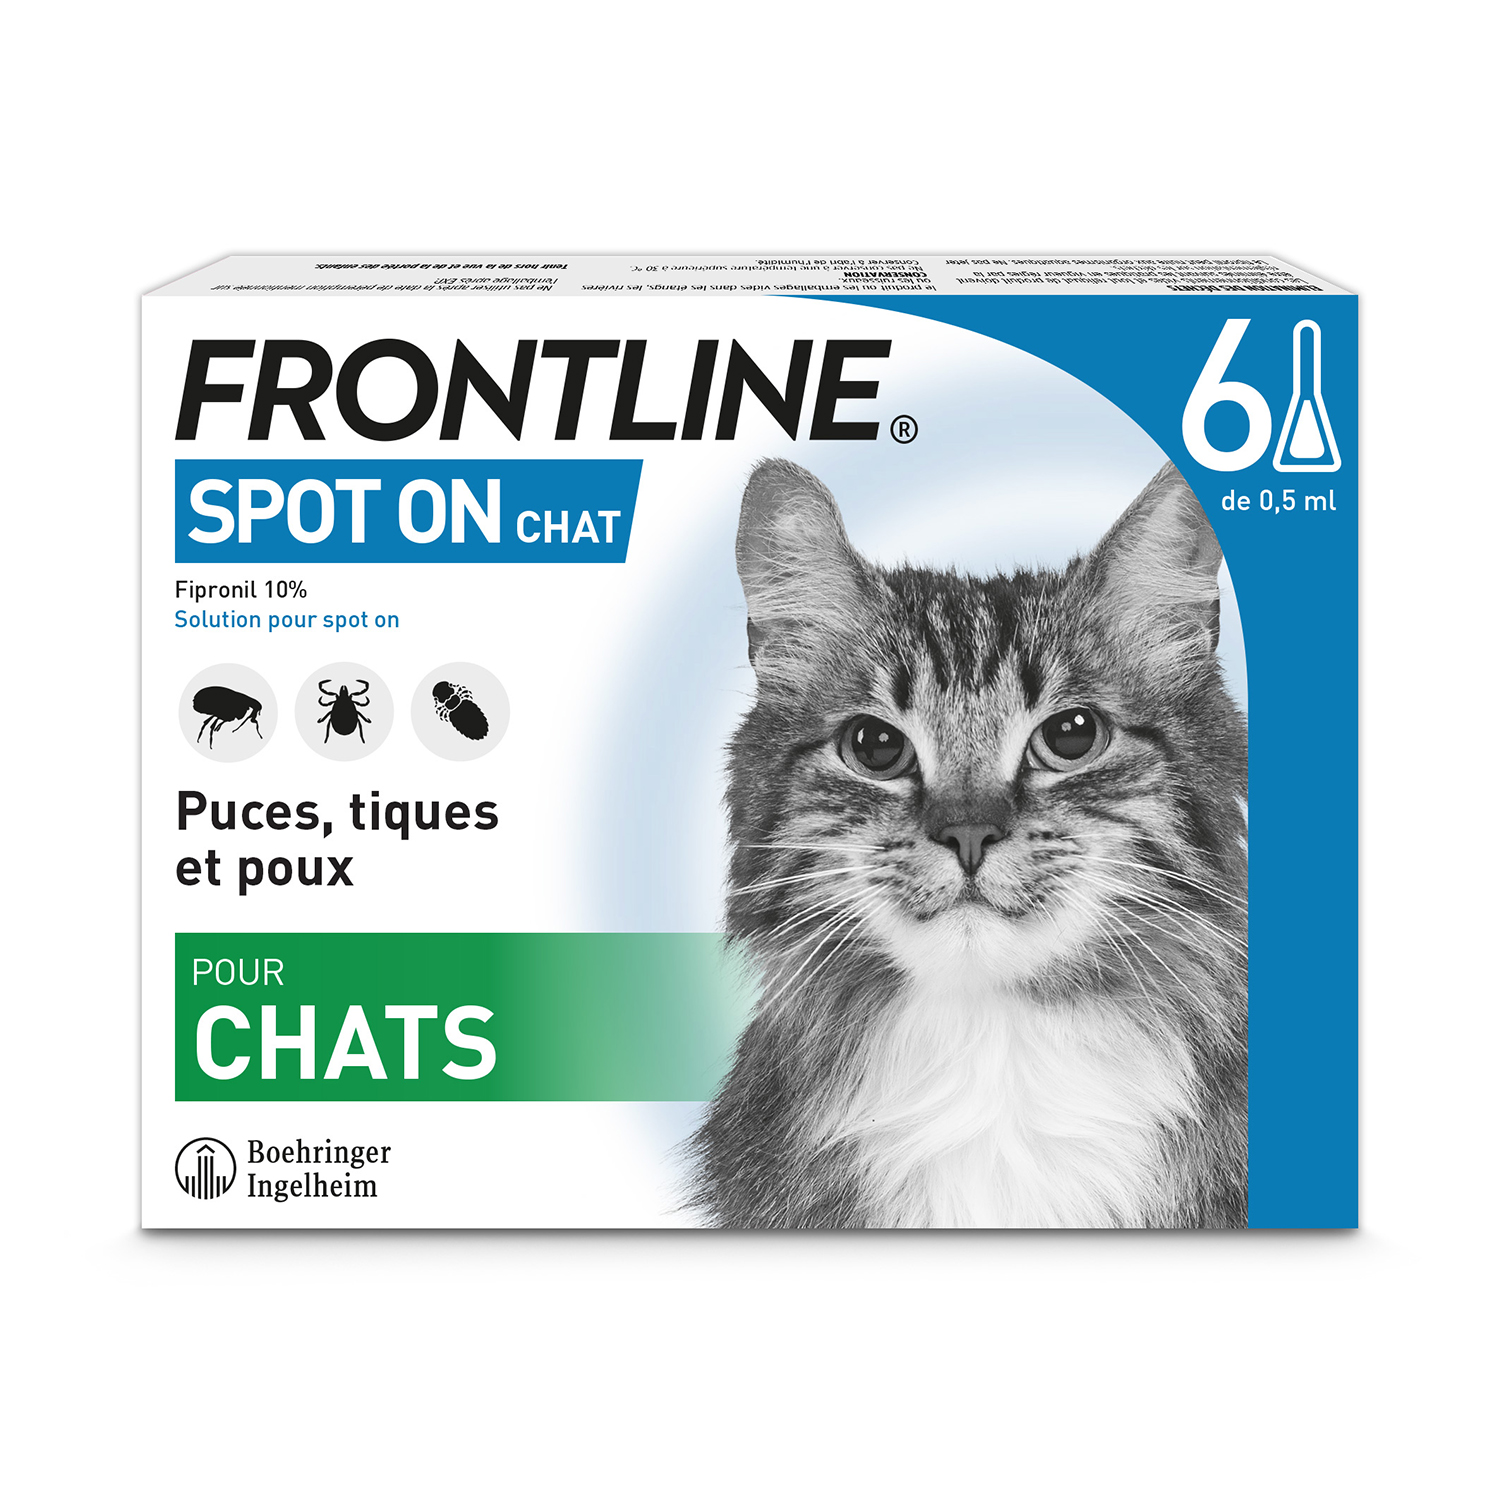 Frontline-SpotOn-Chat-6pipettes-MAIN-FR-2020.jpg